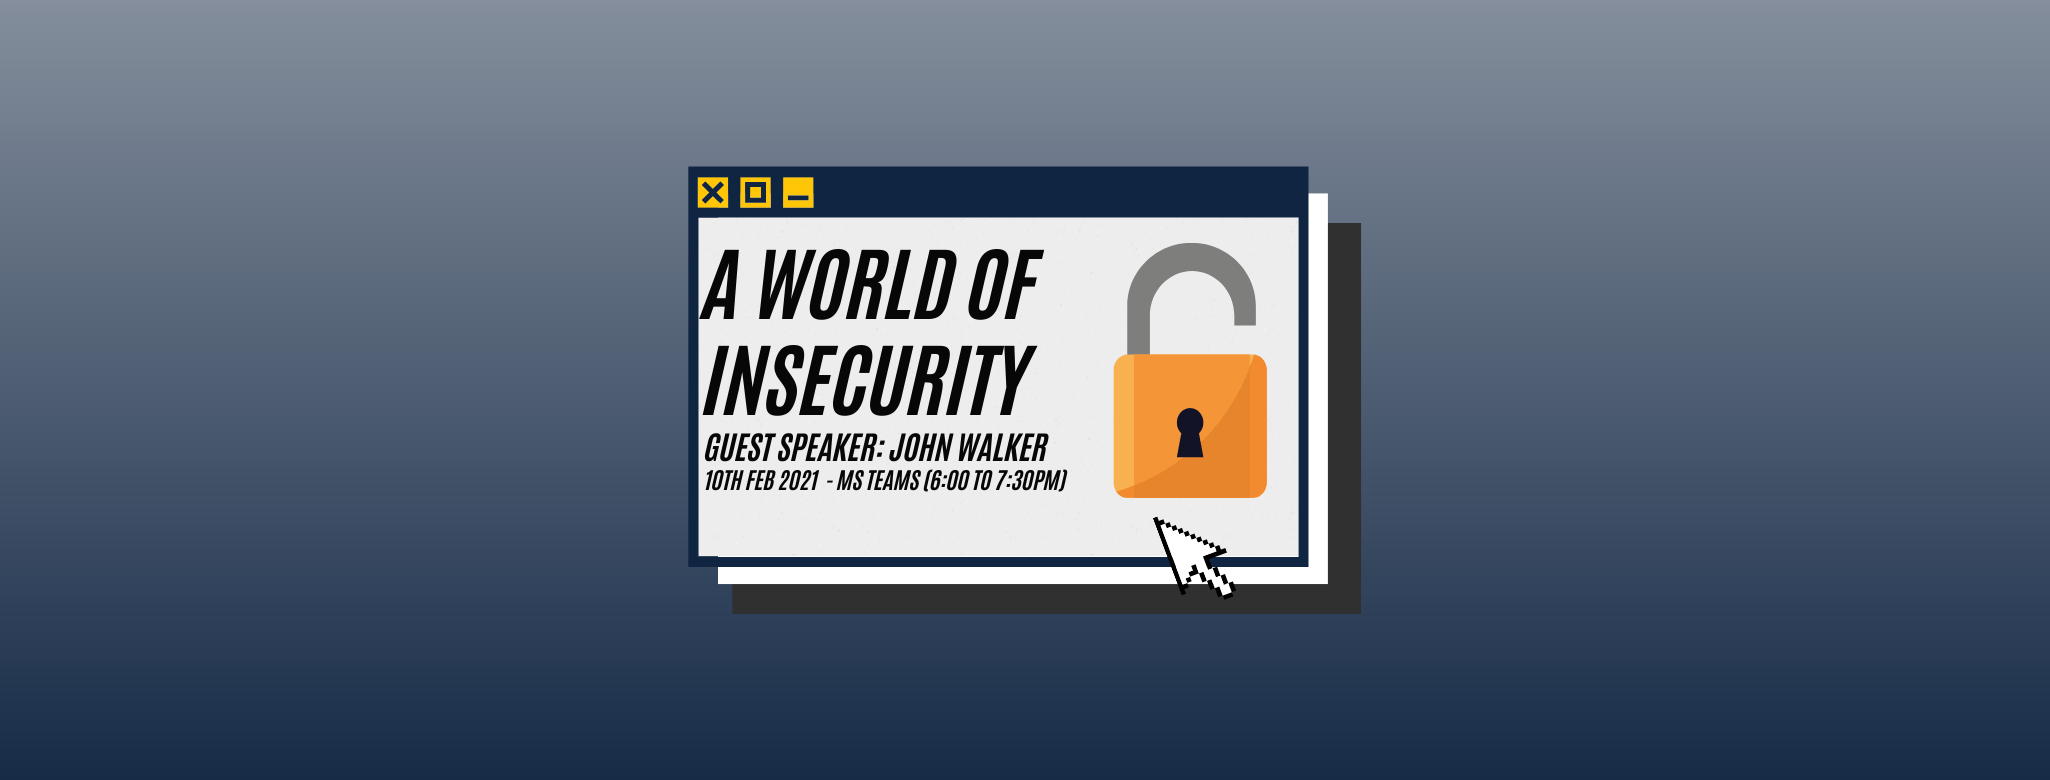 A World of Insecurity Talk Header